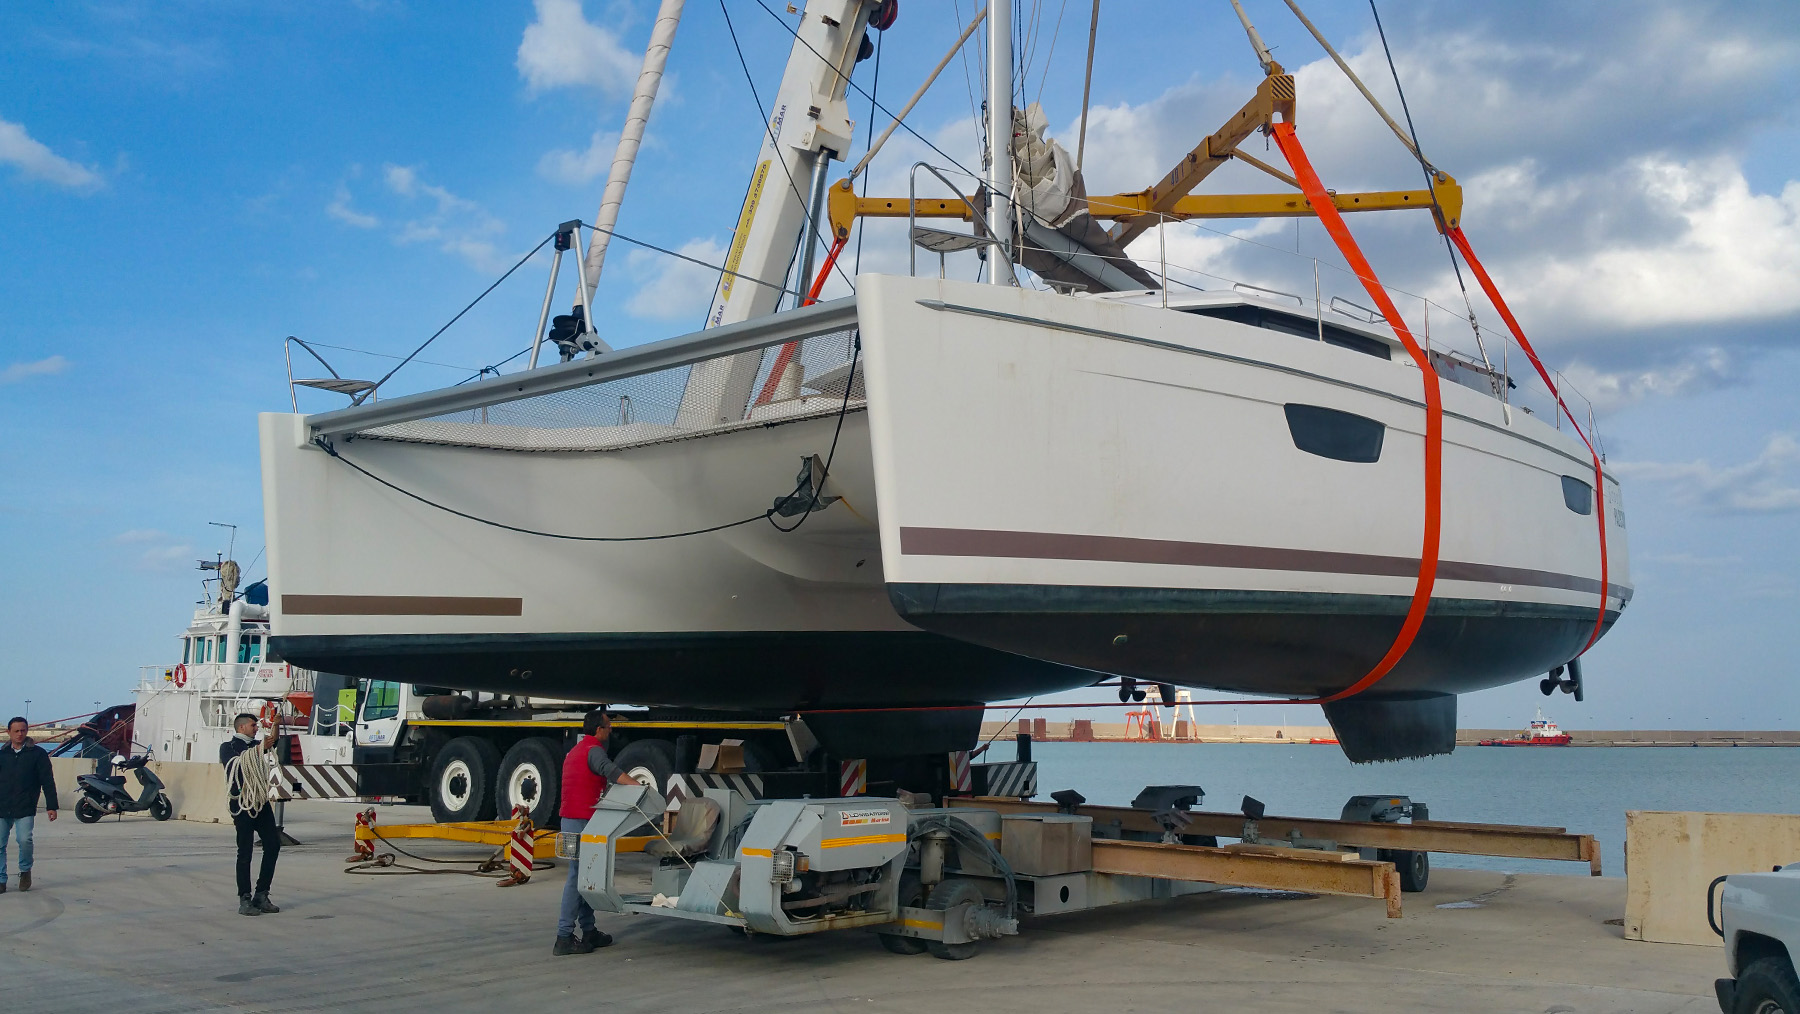 Refitting barche a Termini Imerese - Umrüstung Boote Sizilien